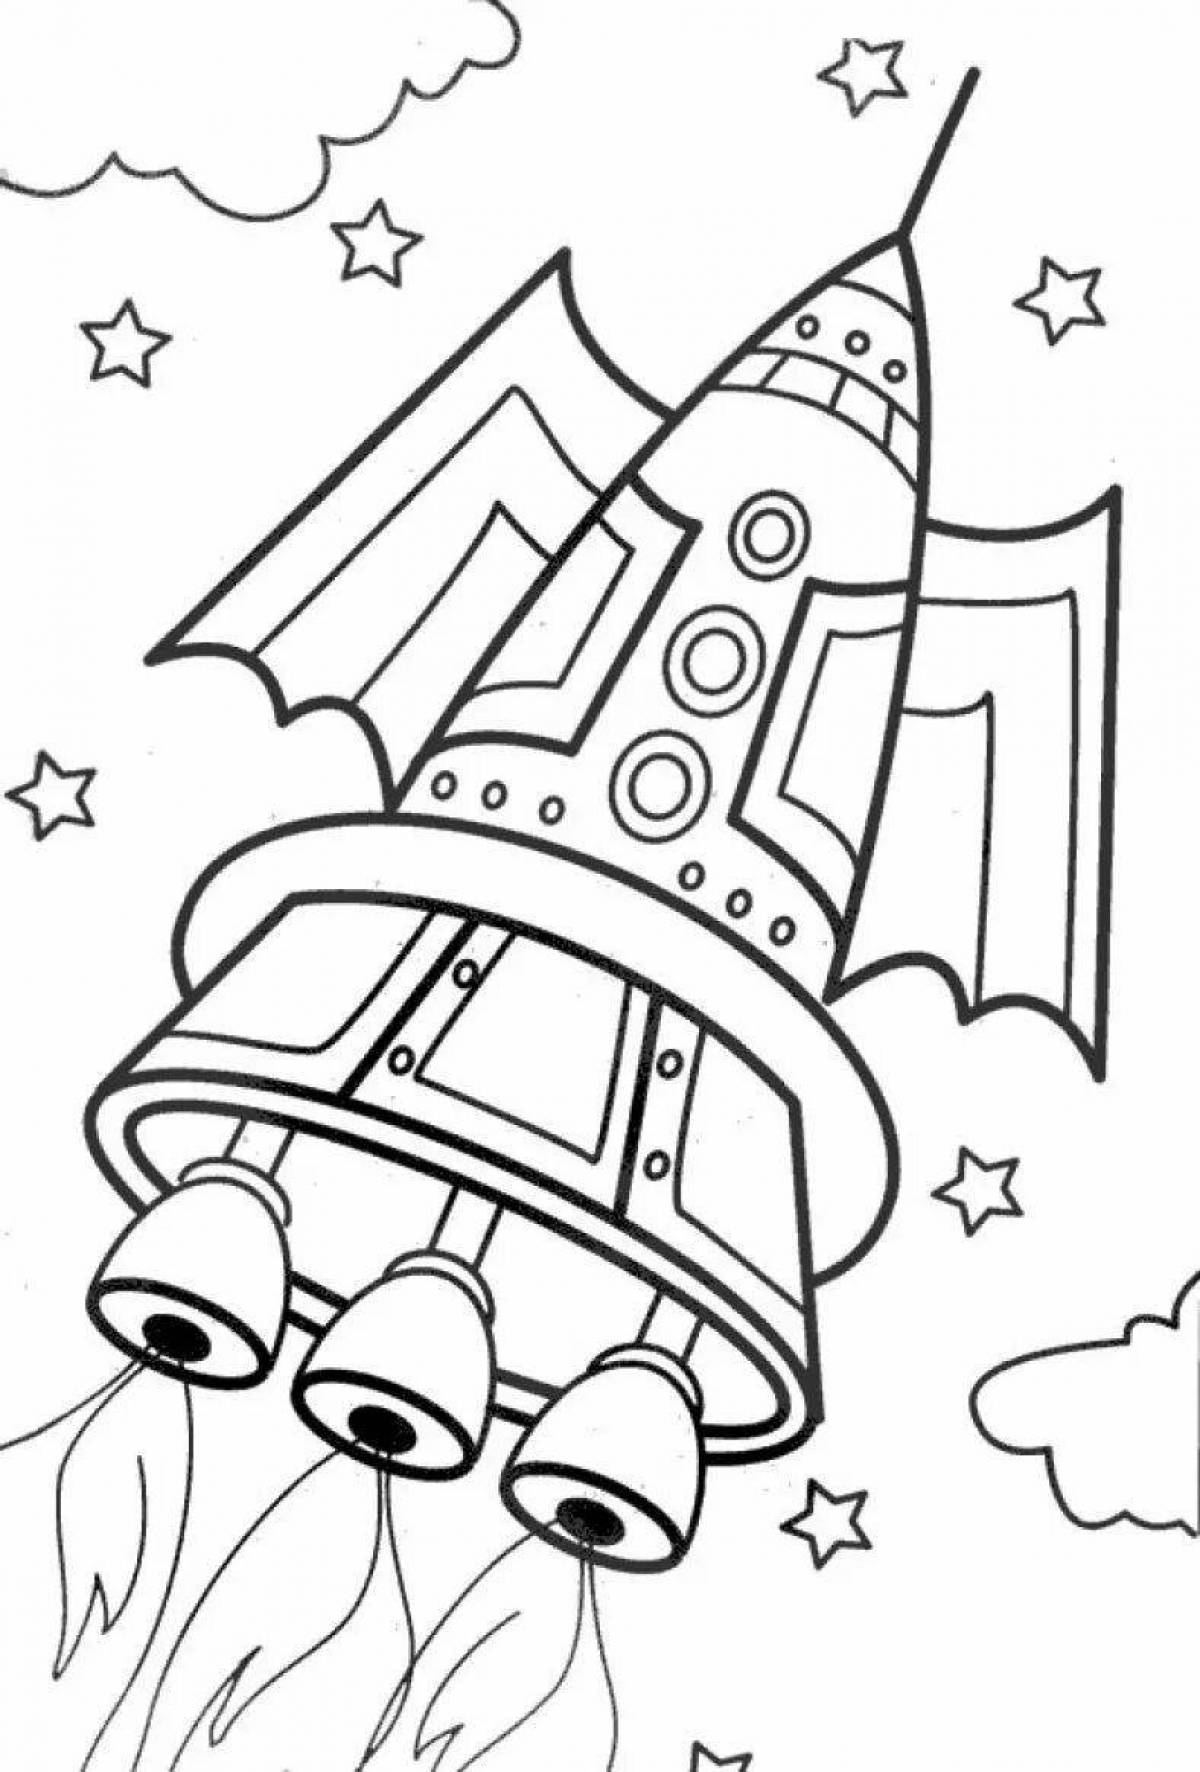 Amazing space rocket coloring page